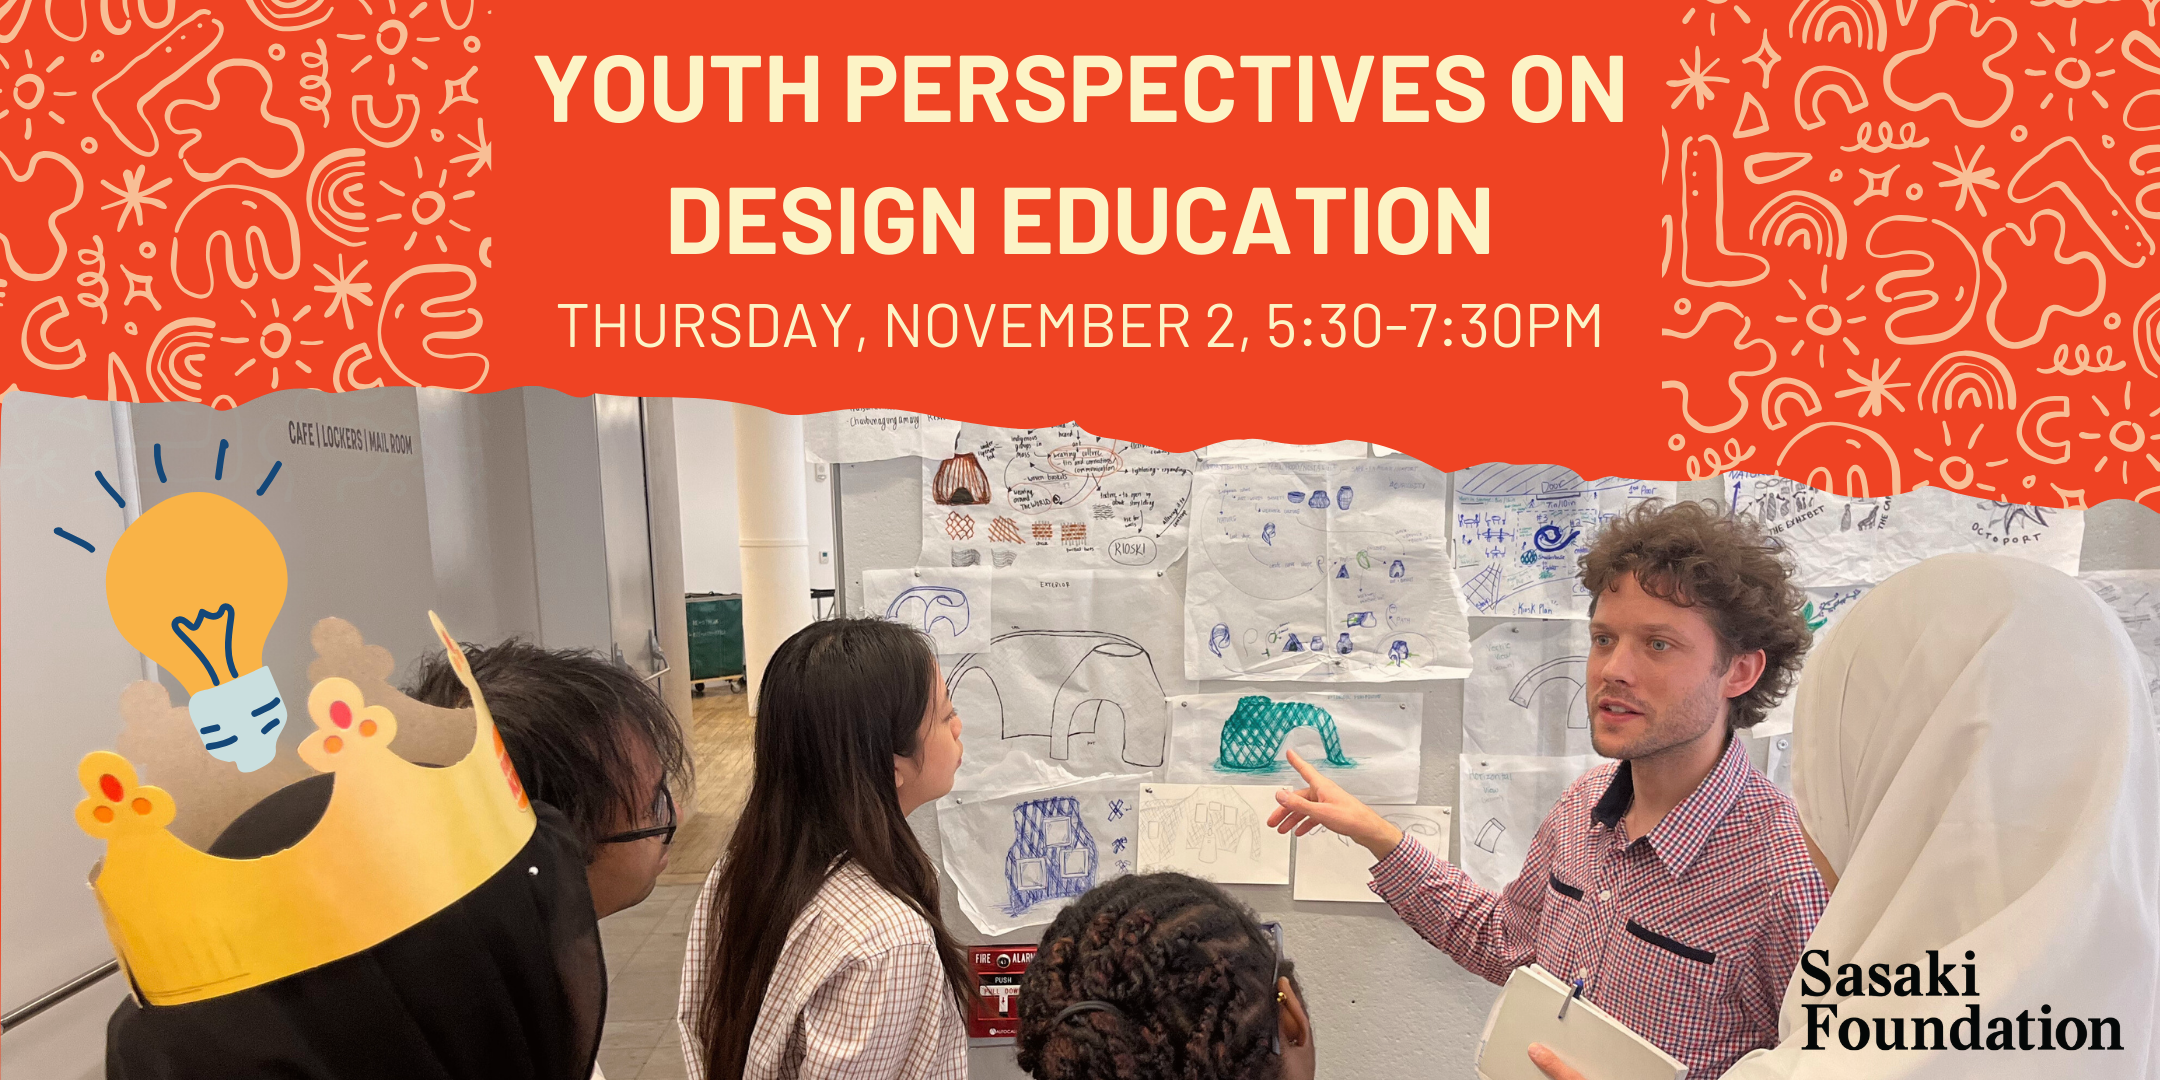 Event graphic with a photo of students looking at and discussion sketches pinned on a wall, with text reading Youth PErspectives on Design Education, Thursday, November, 5:30-7:30pm, Sasaki Foundation